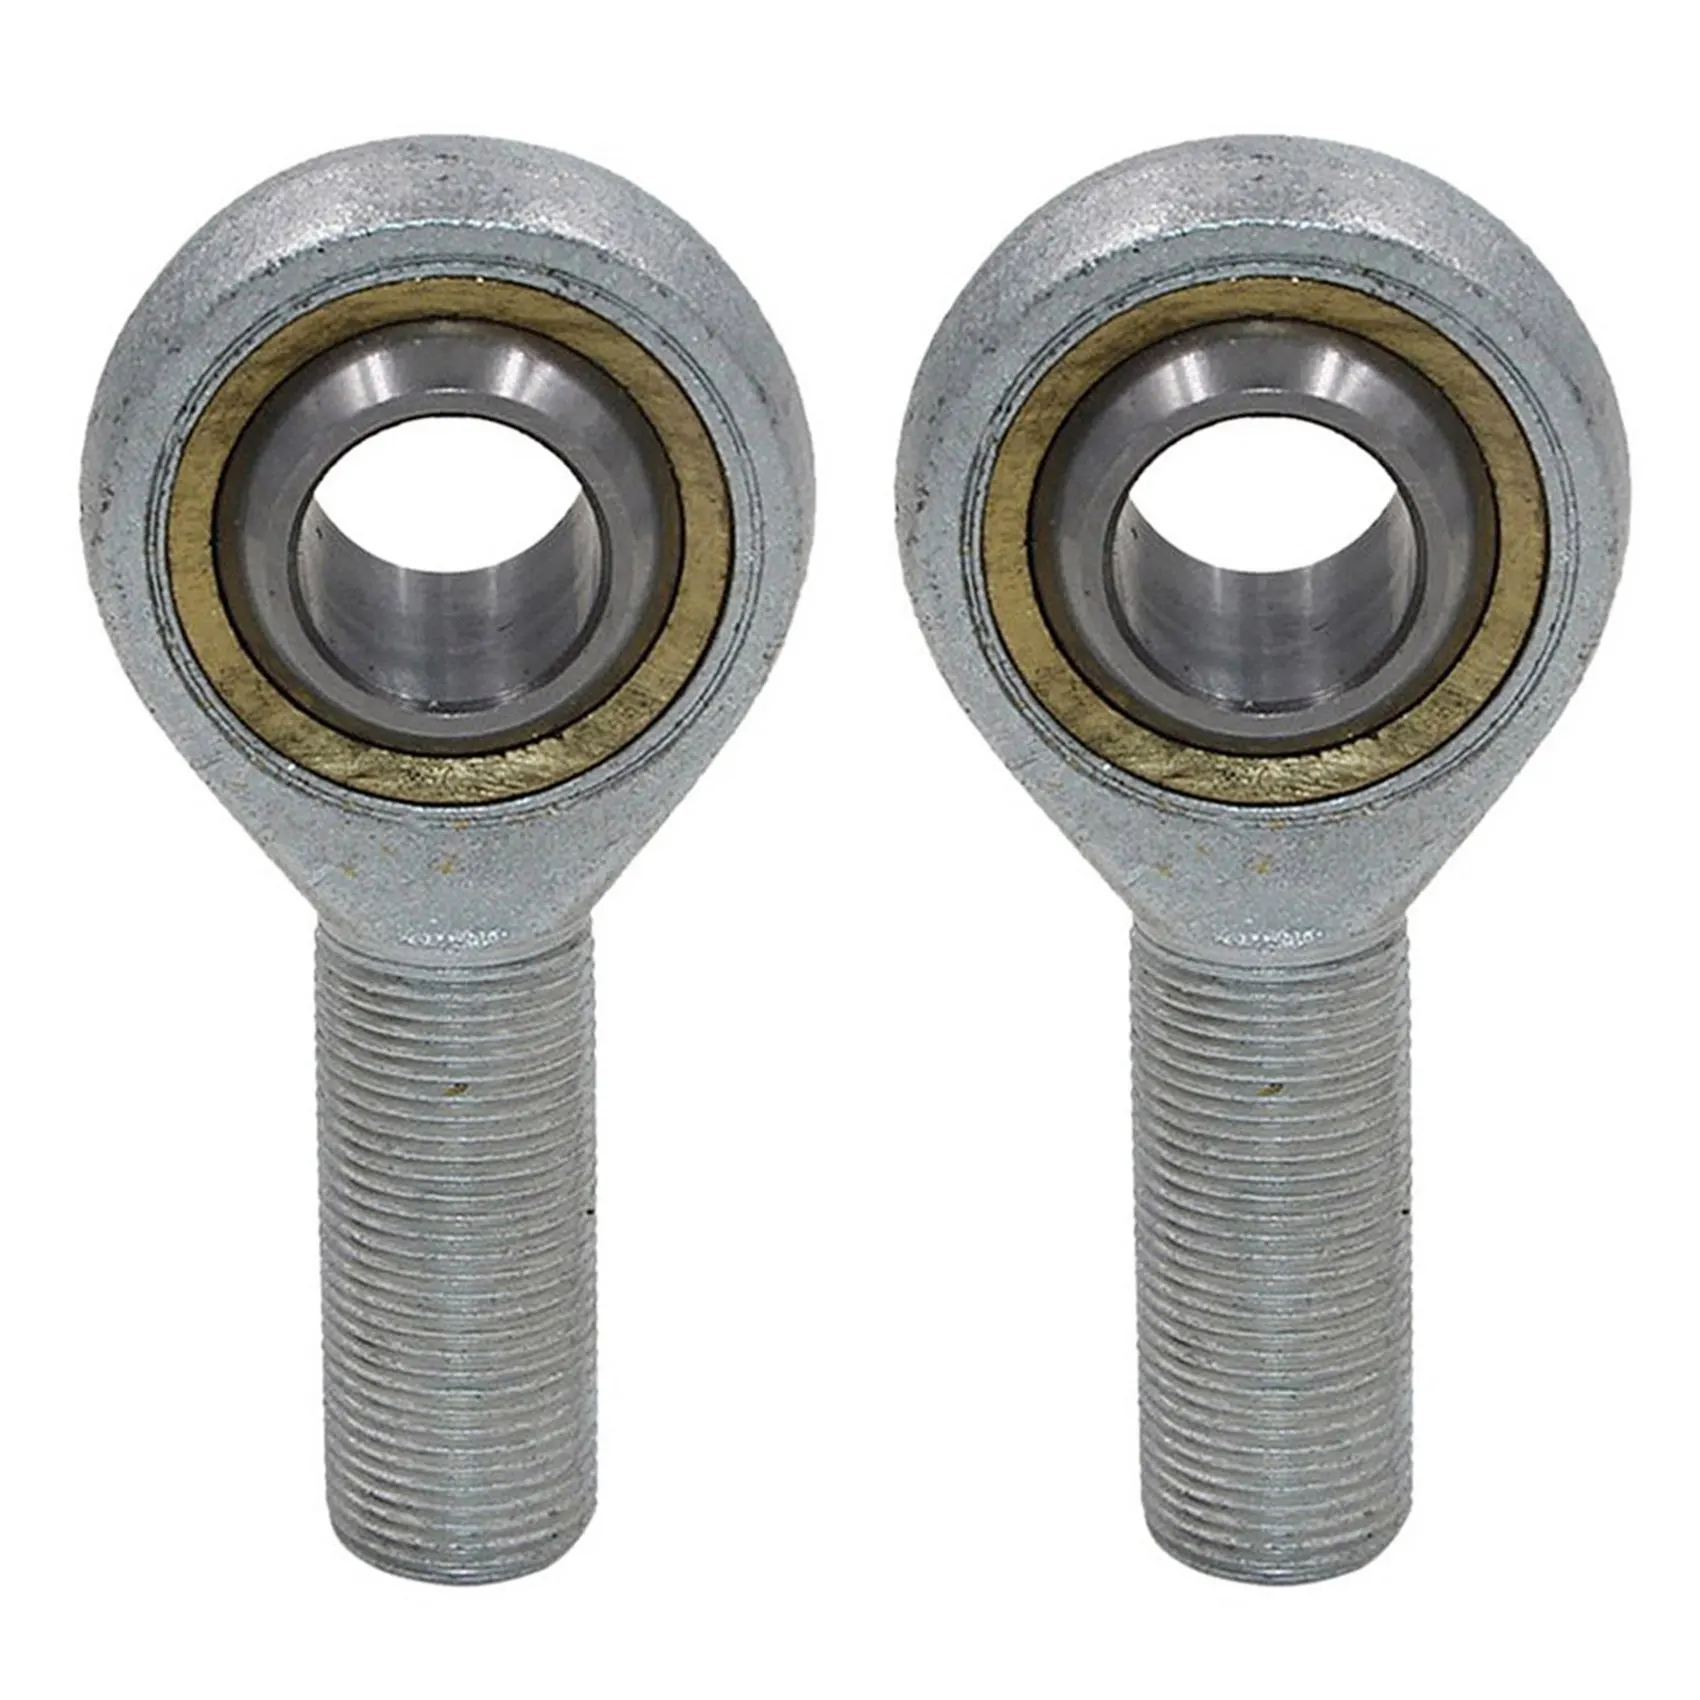 

2X Male Metric Joint End Threaded Rod Single Bearing Spherical Bearing - M12 12mm